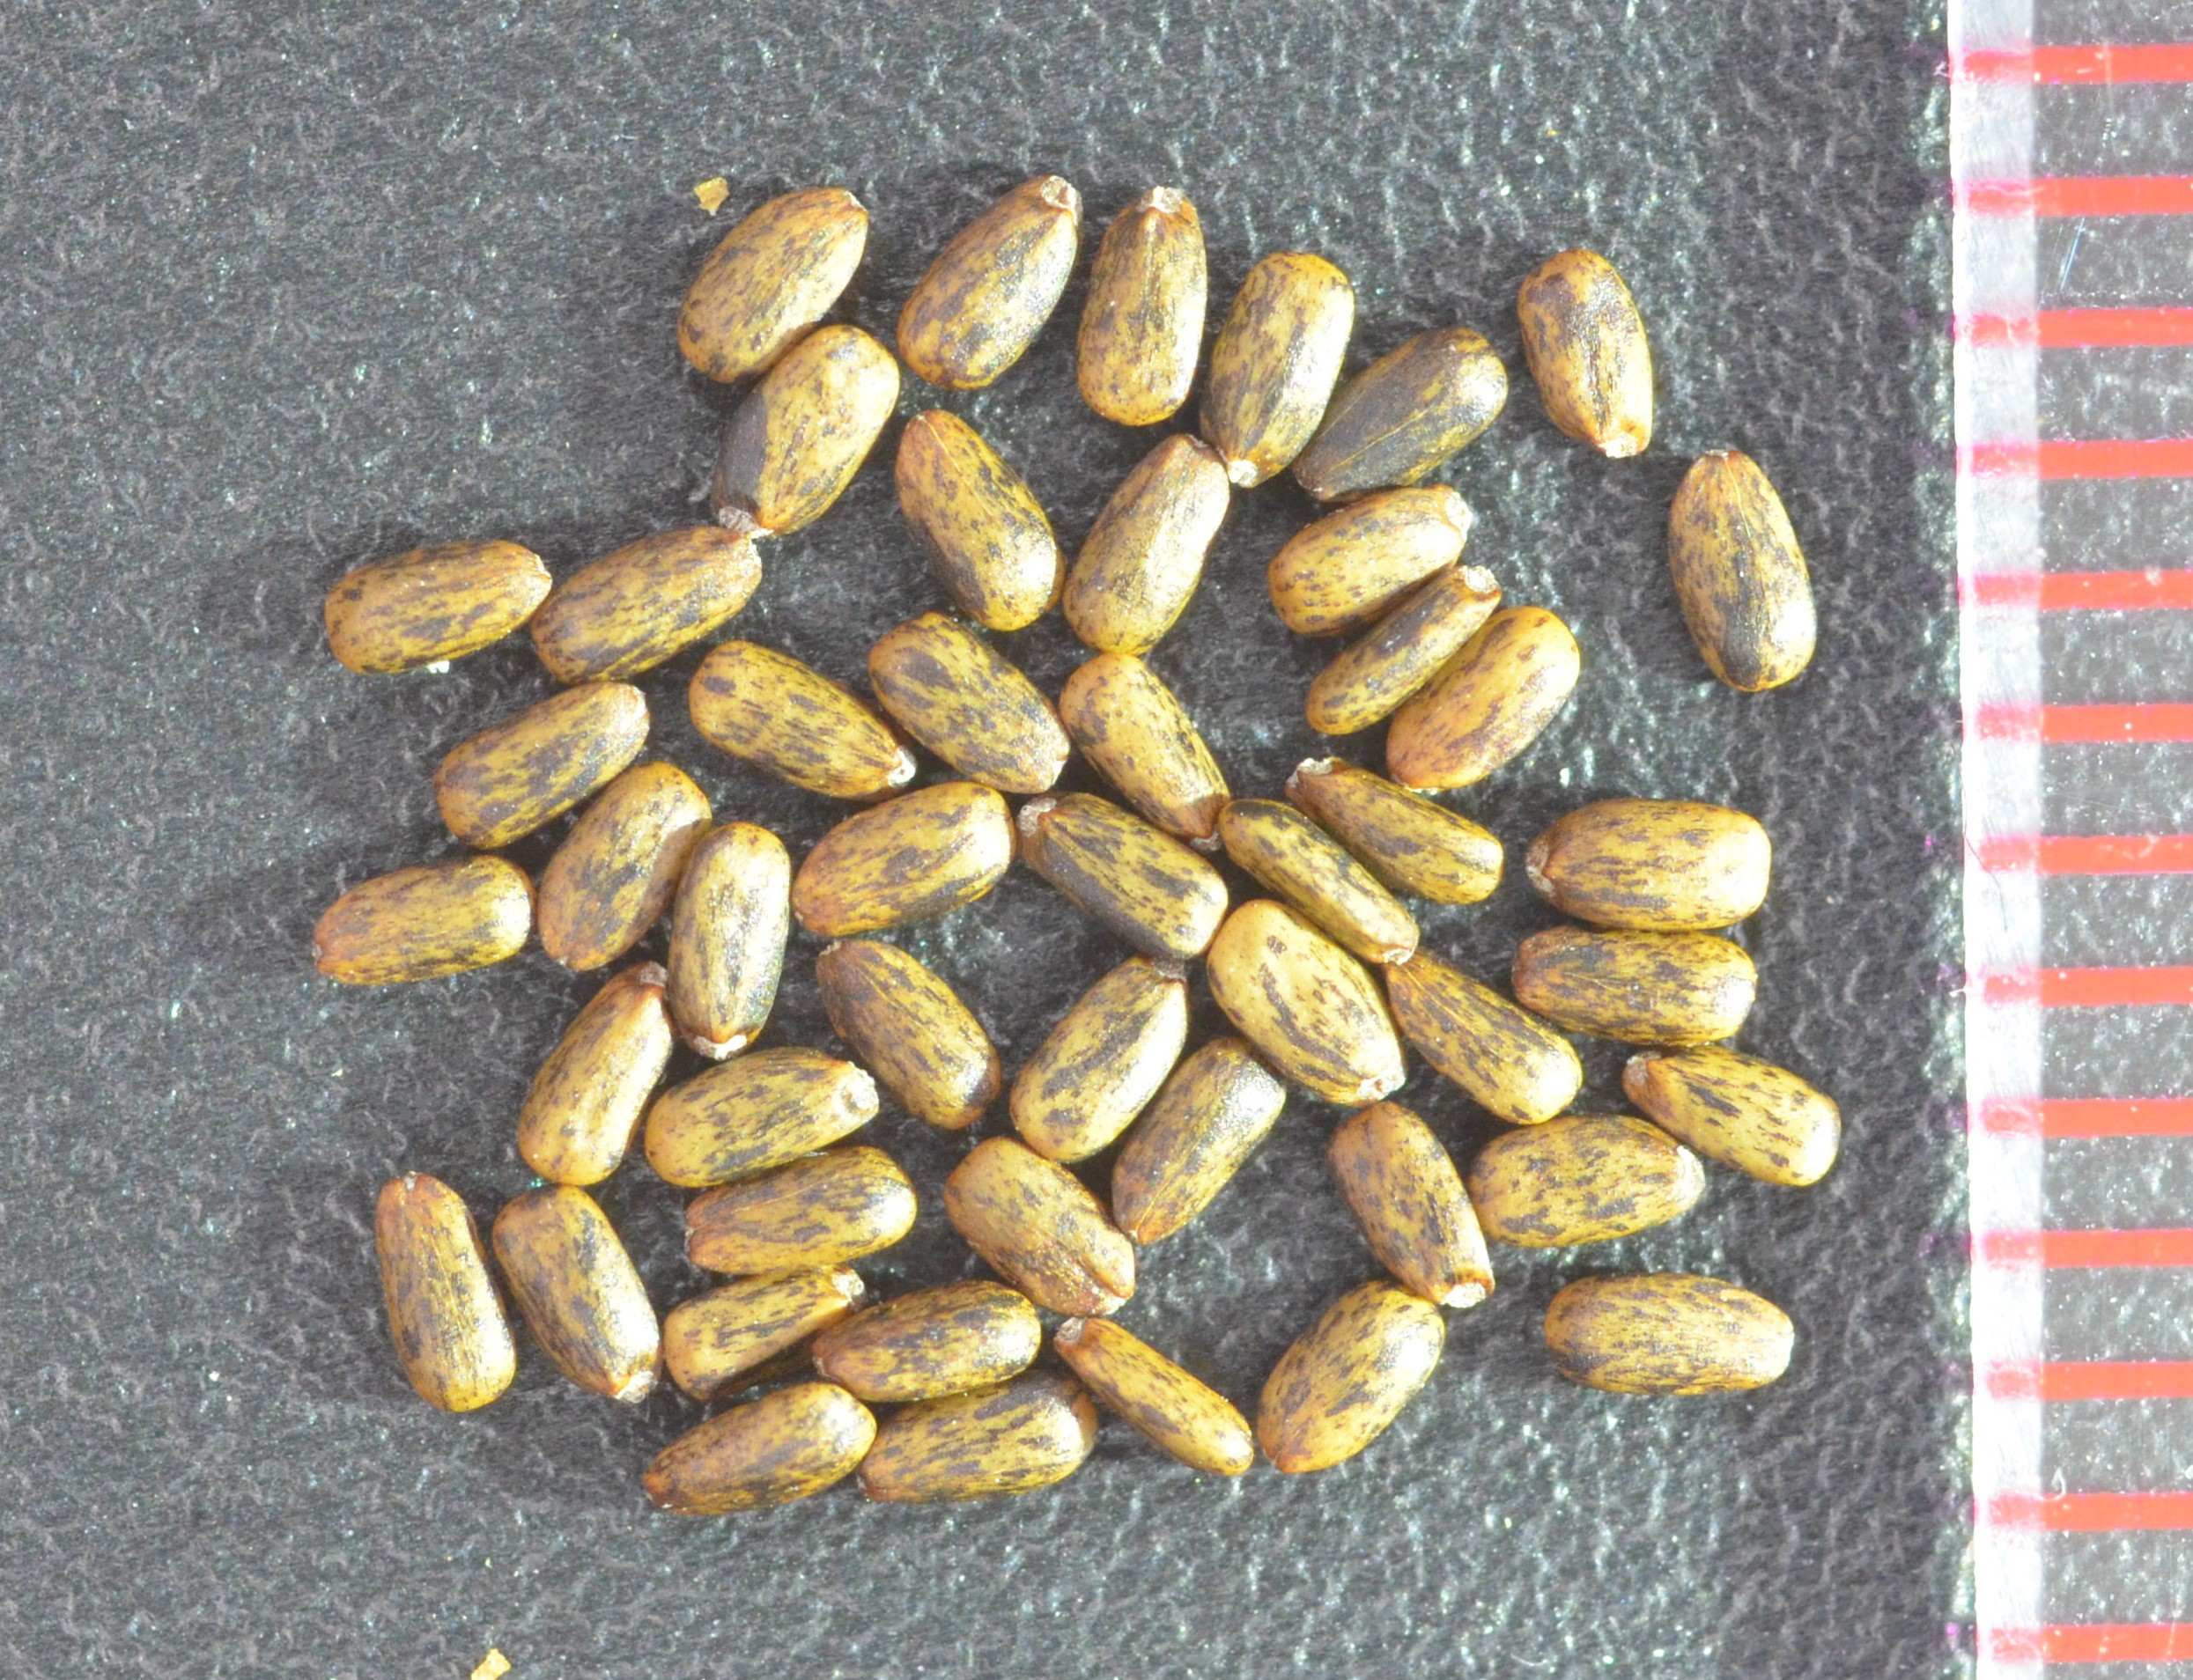 Monardella odoratissima seeds with mm ruler on the right.